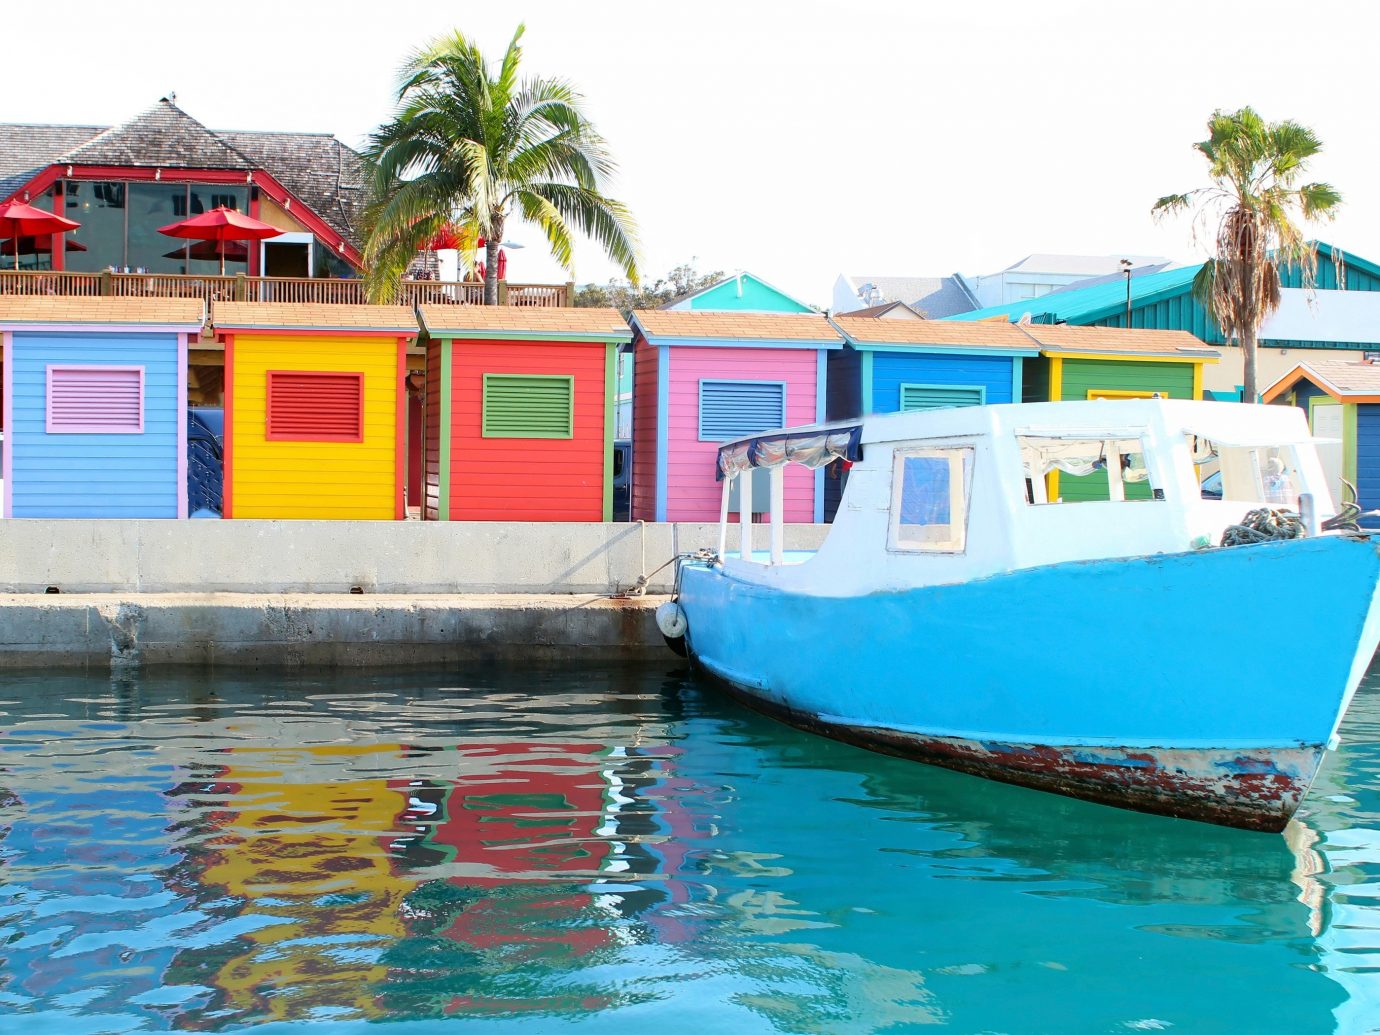 Trip Ideas water Boat outdoor leisure vehicle swimming pool Harbor Resort waterway colorful colored